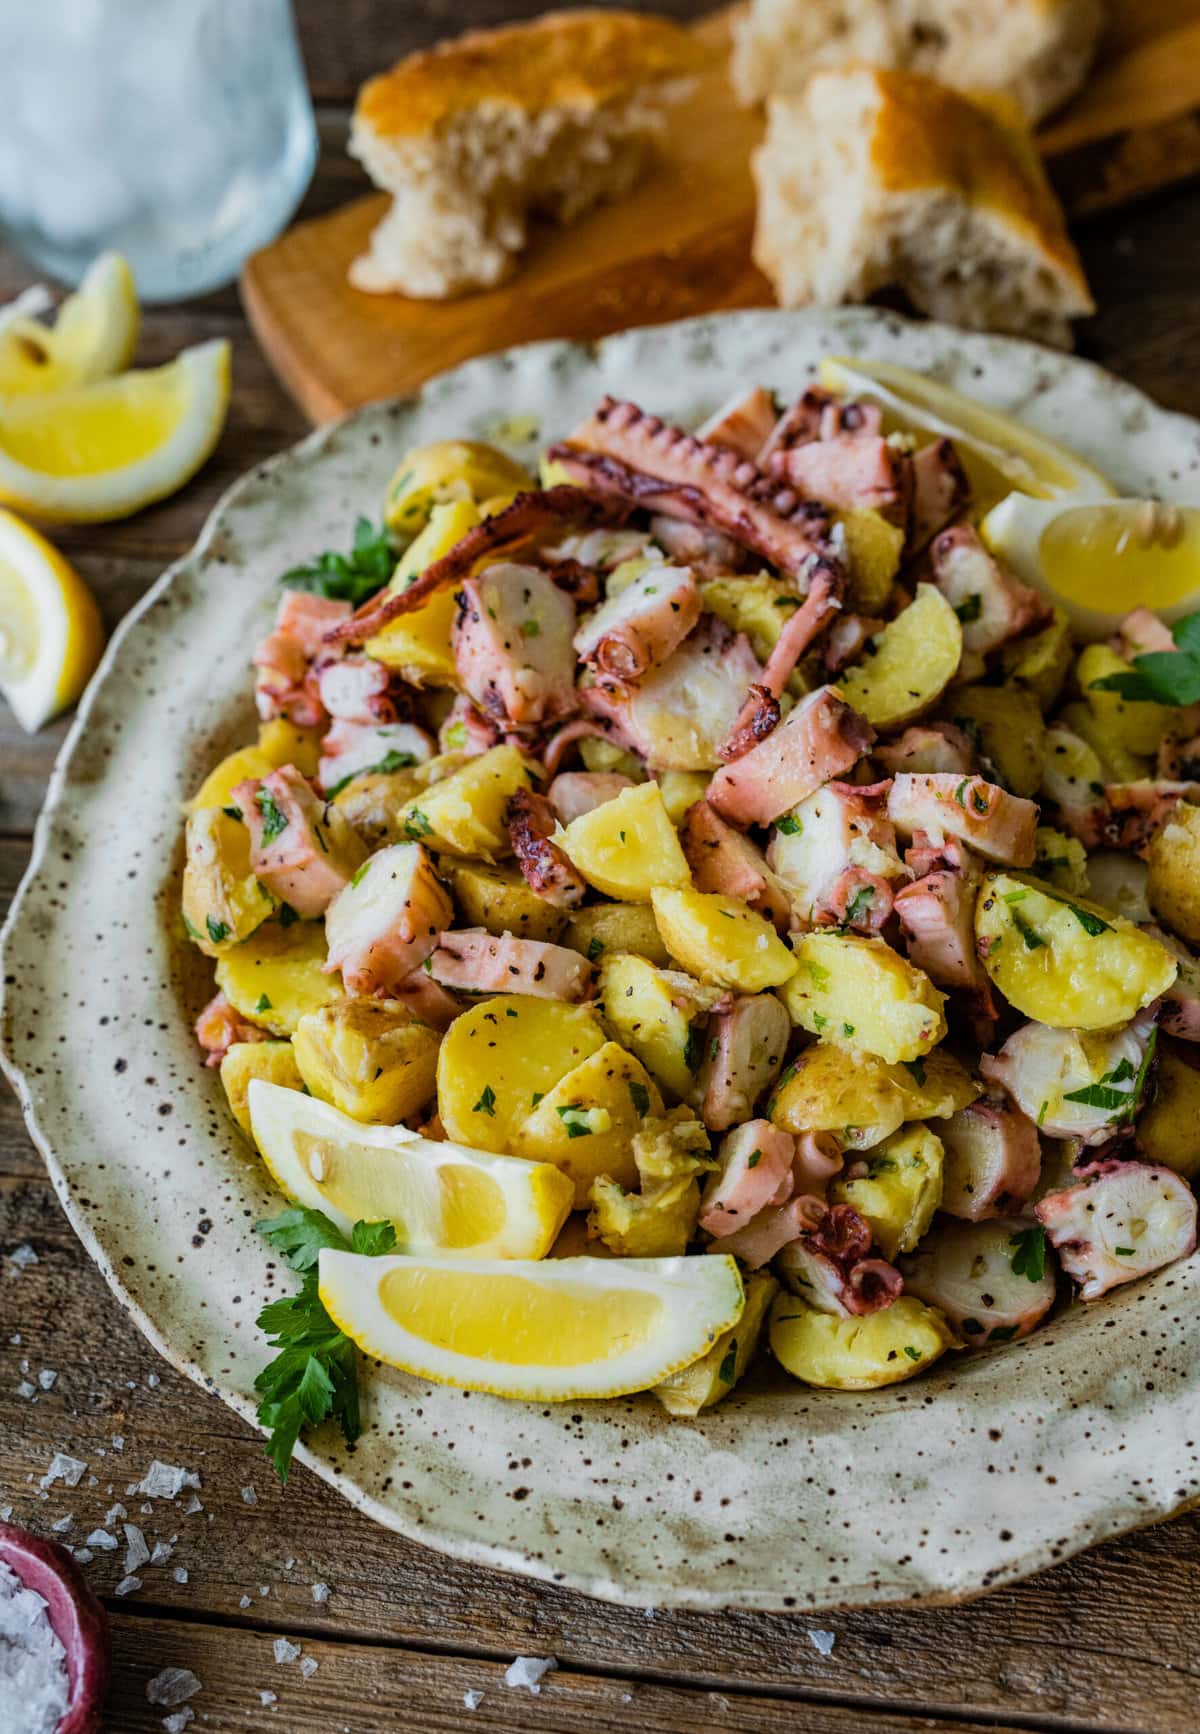 Italian Octopus Salad Recipe with Potatoes (Insalata Di Polpo) in a plate with a fork. Side of lemon and bread.